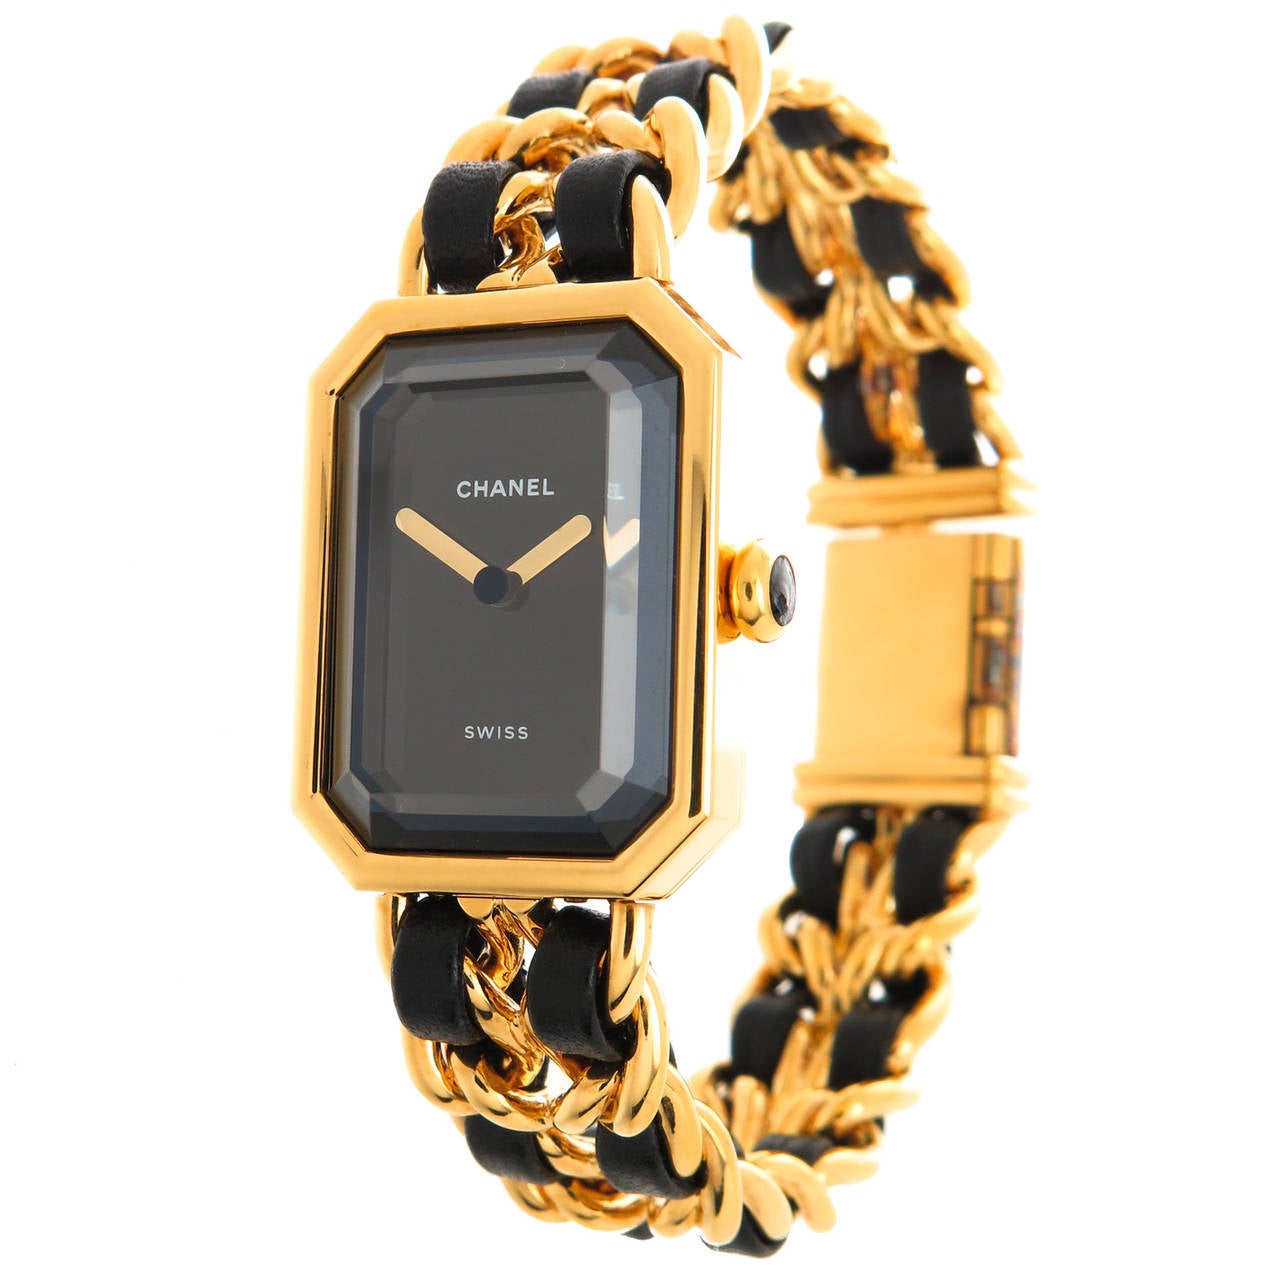 1990s Lady's Premier Wristwatch by Chanel, Gold - Plate case and Bracelet with Black Leather woven into the Bracelet links. Sapphire Glass Crystal, Quartz Movement. Total Length 6 1/2 Inches.